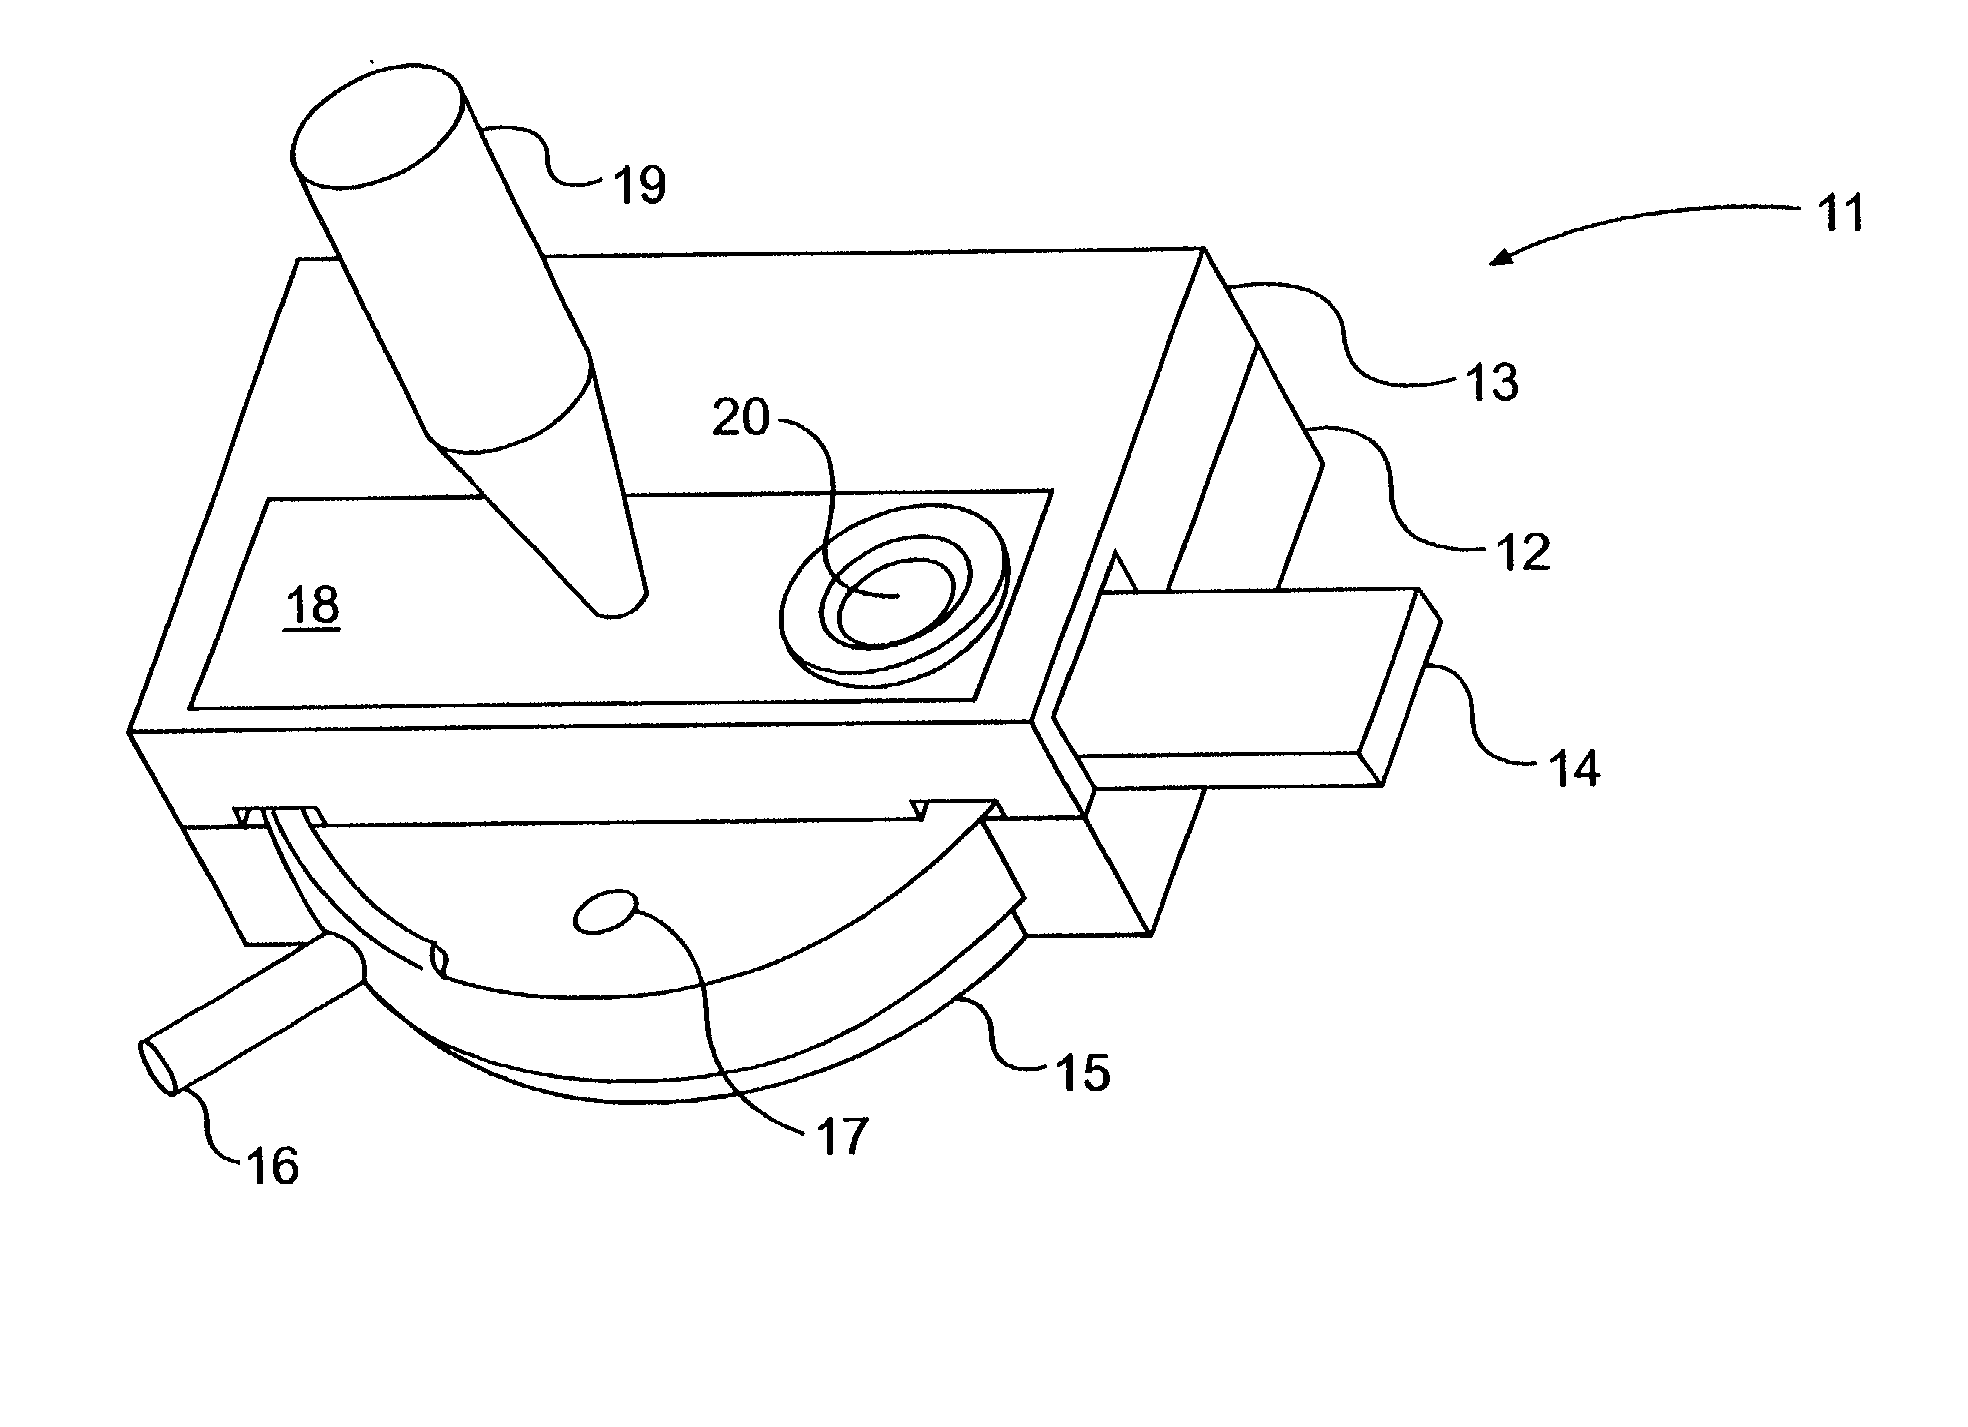 System, method and apparatus for filling containers